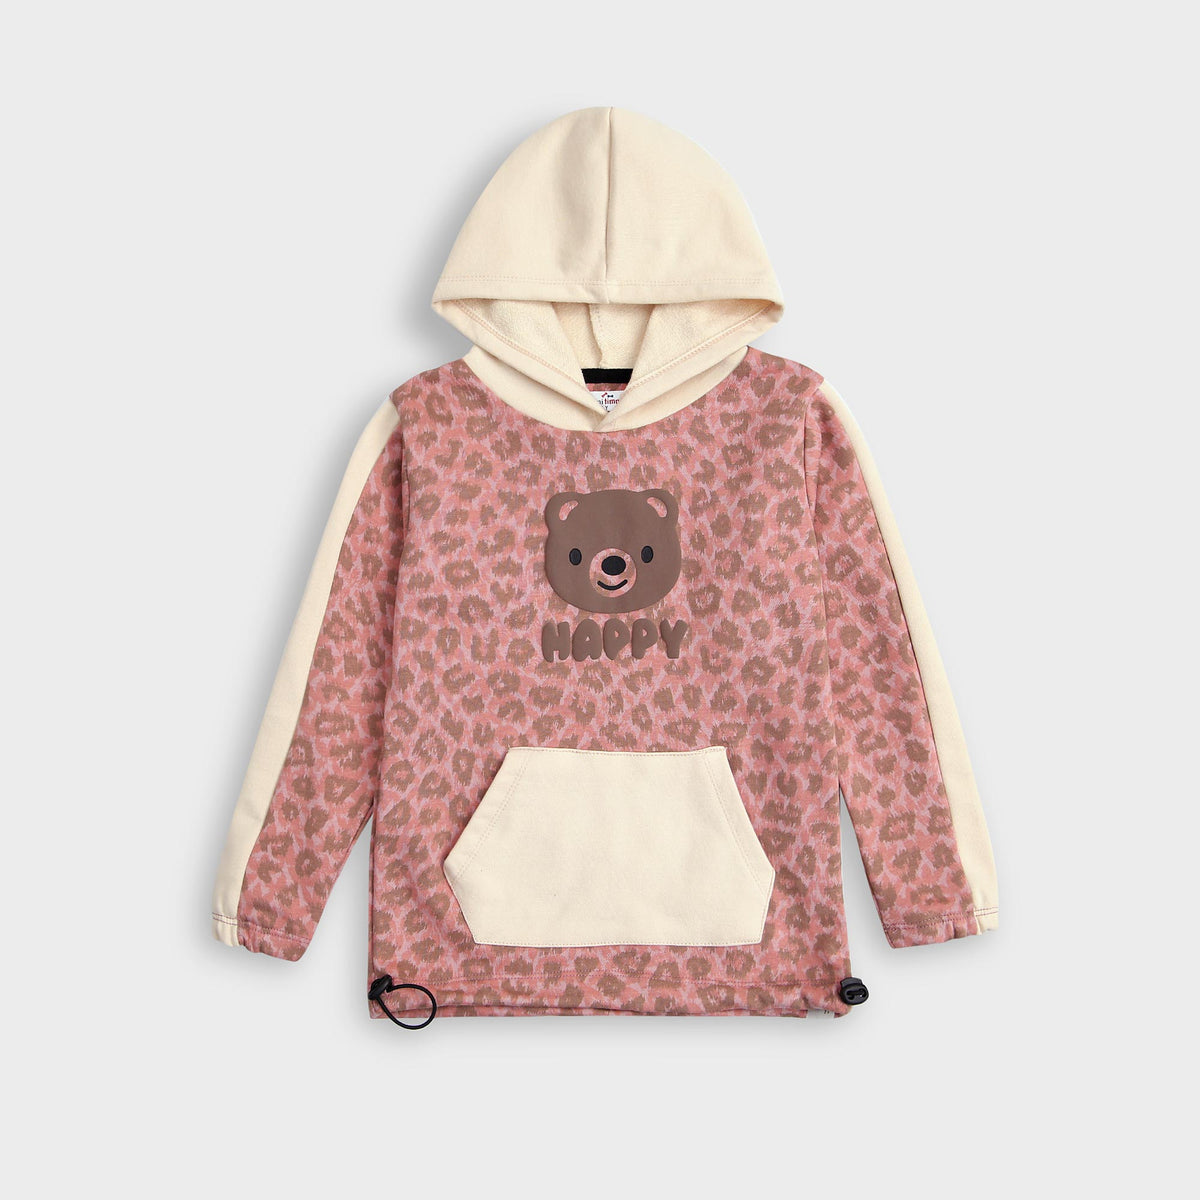 Premium Quality All-Over Printed Terry Hoodie For Girls